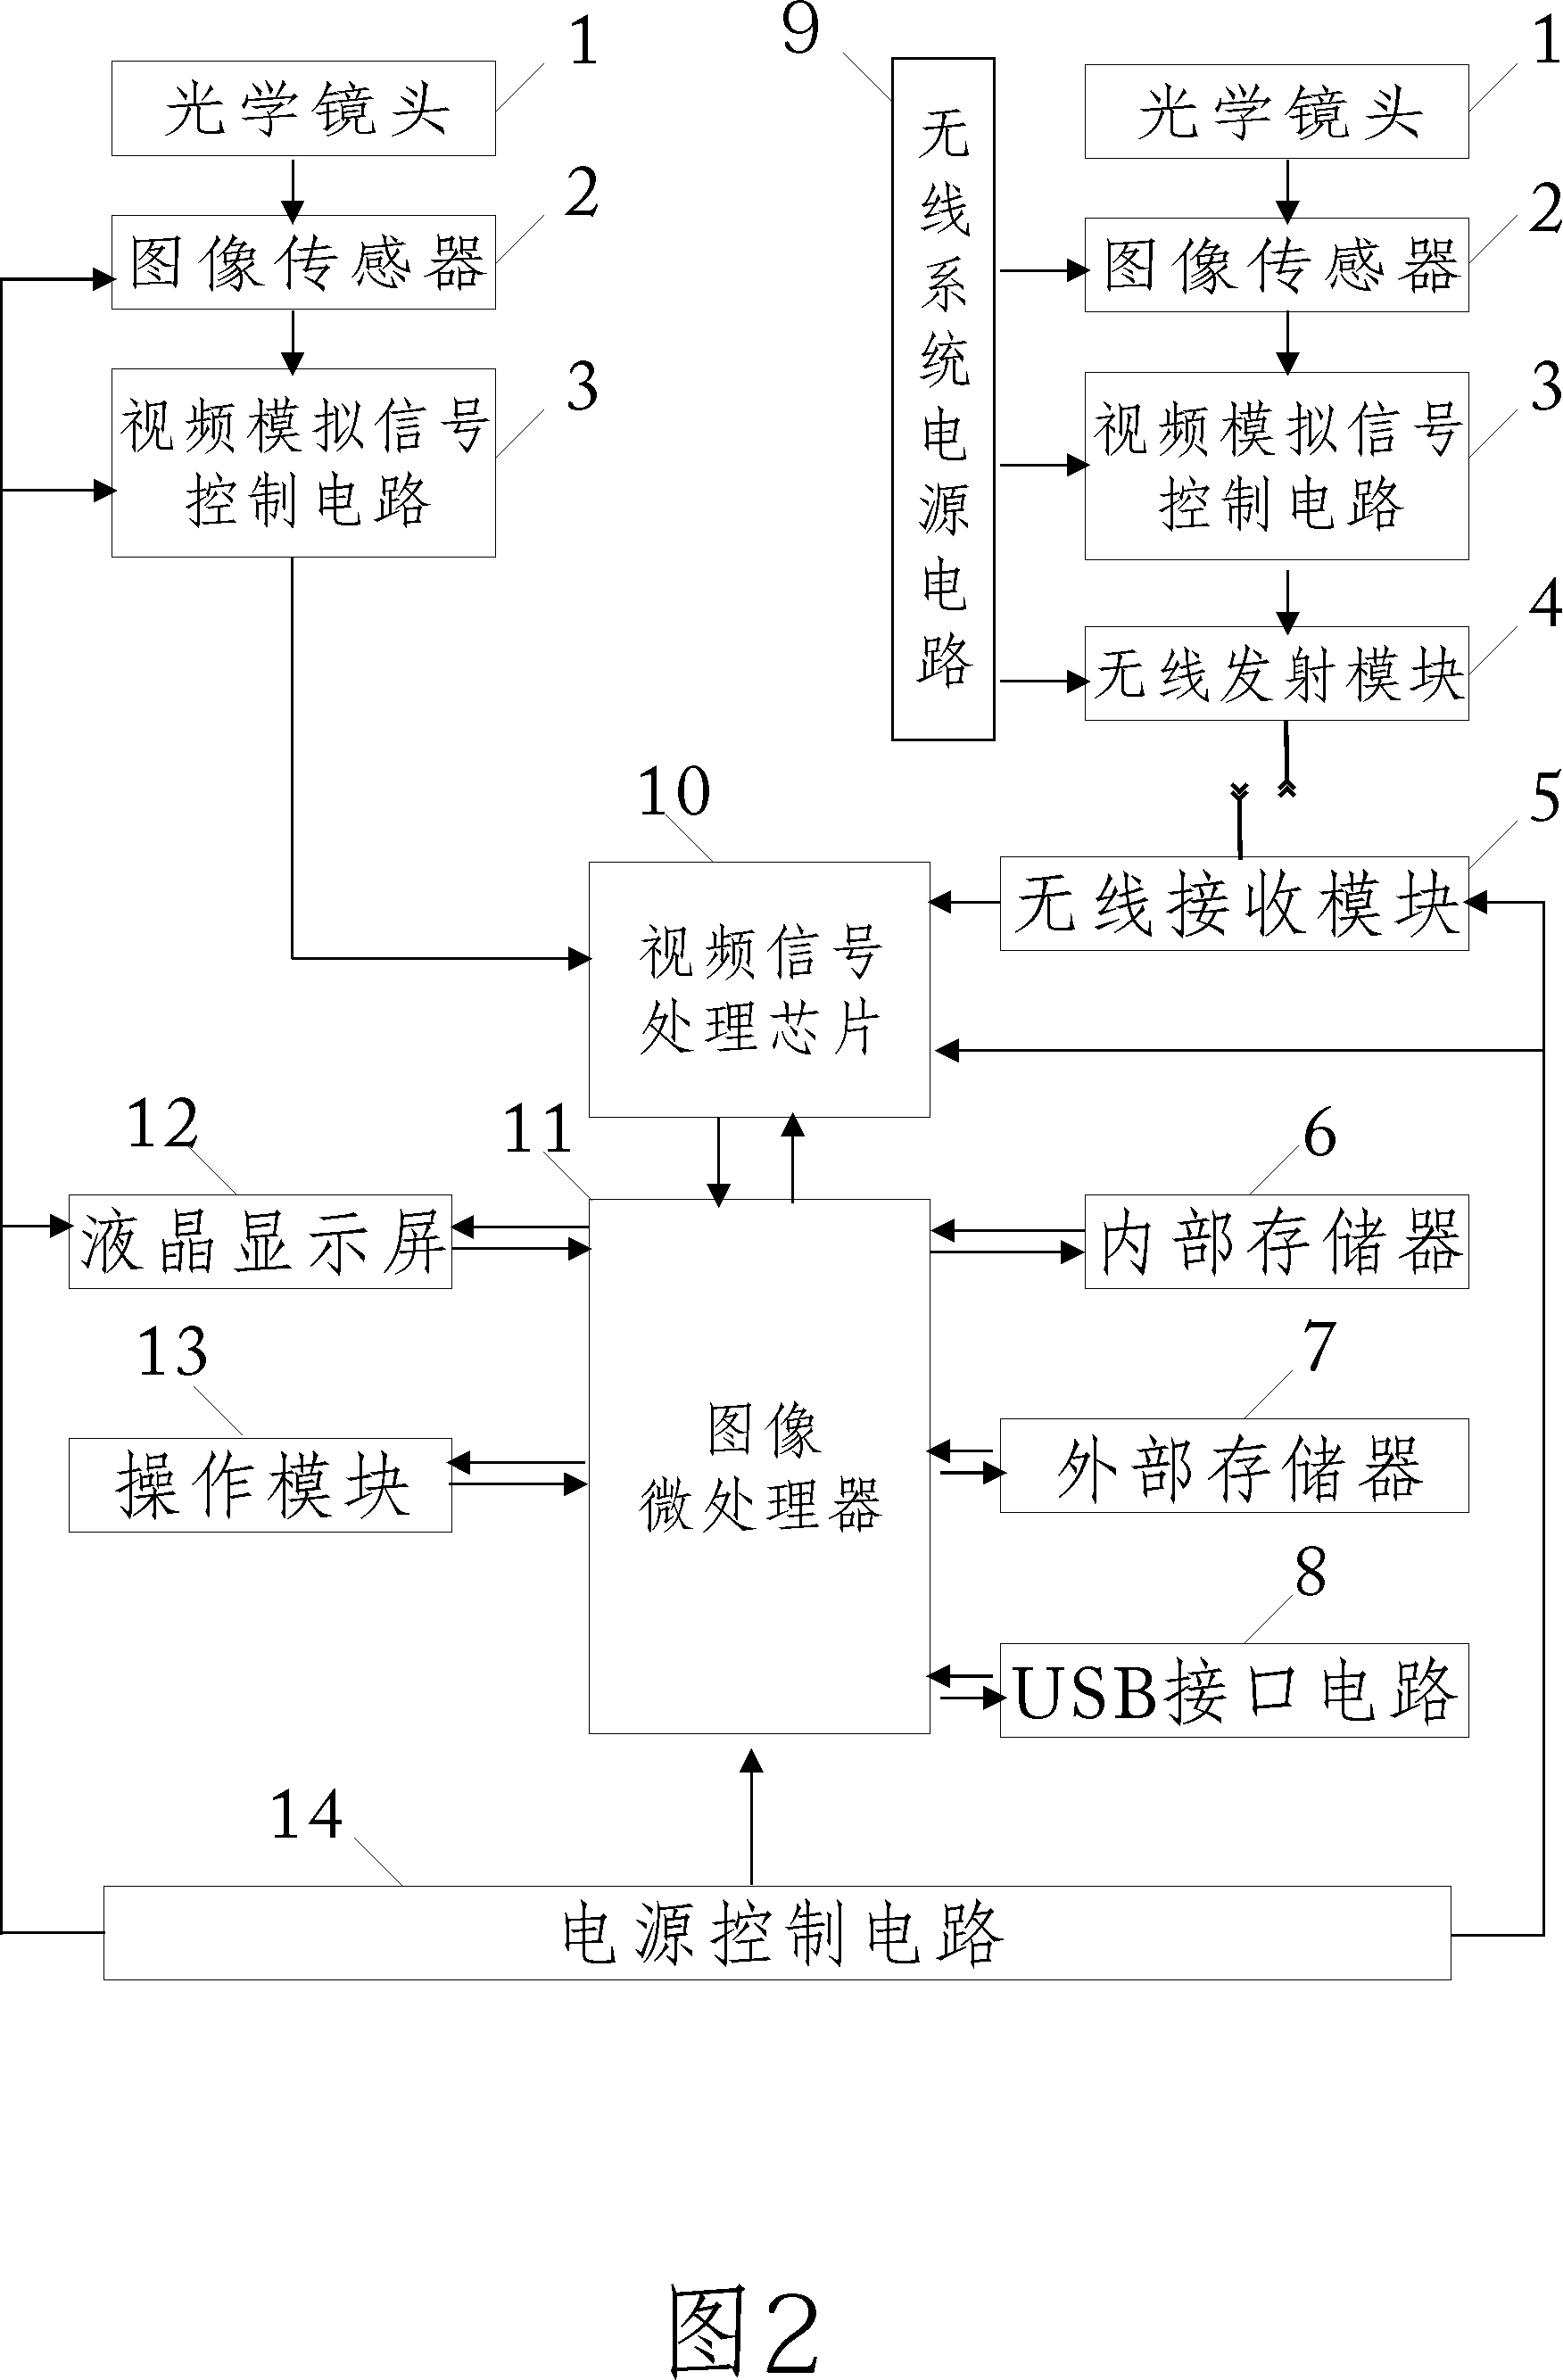 Vehicle failure endoscopic diagnostic system and method